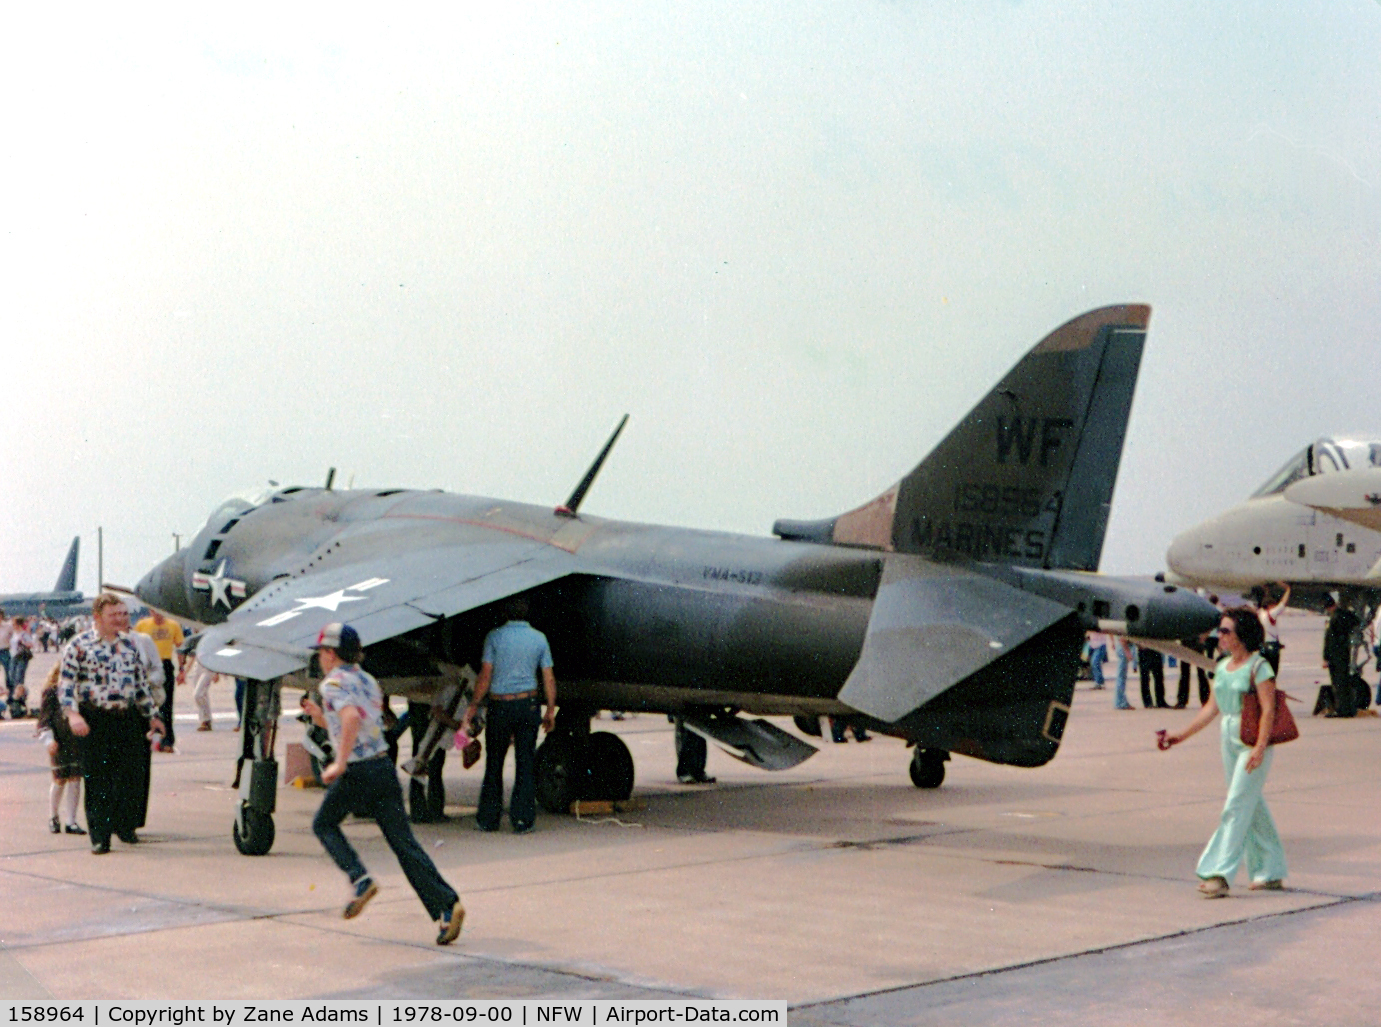 158964, Hawker Siddeley AV-8A Harrier C/N 712125, At Carswell Air Force Base 1978 Airshow - This aircraft has been reportedly scrapped at AMARC